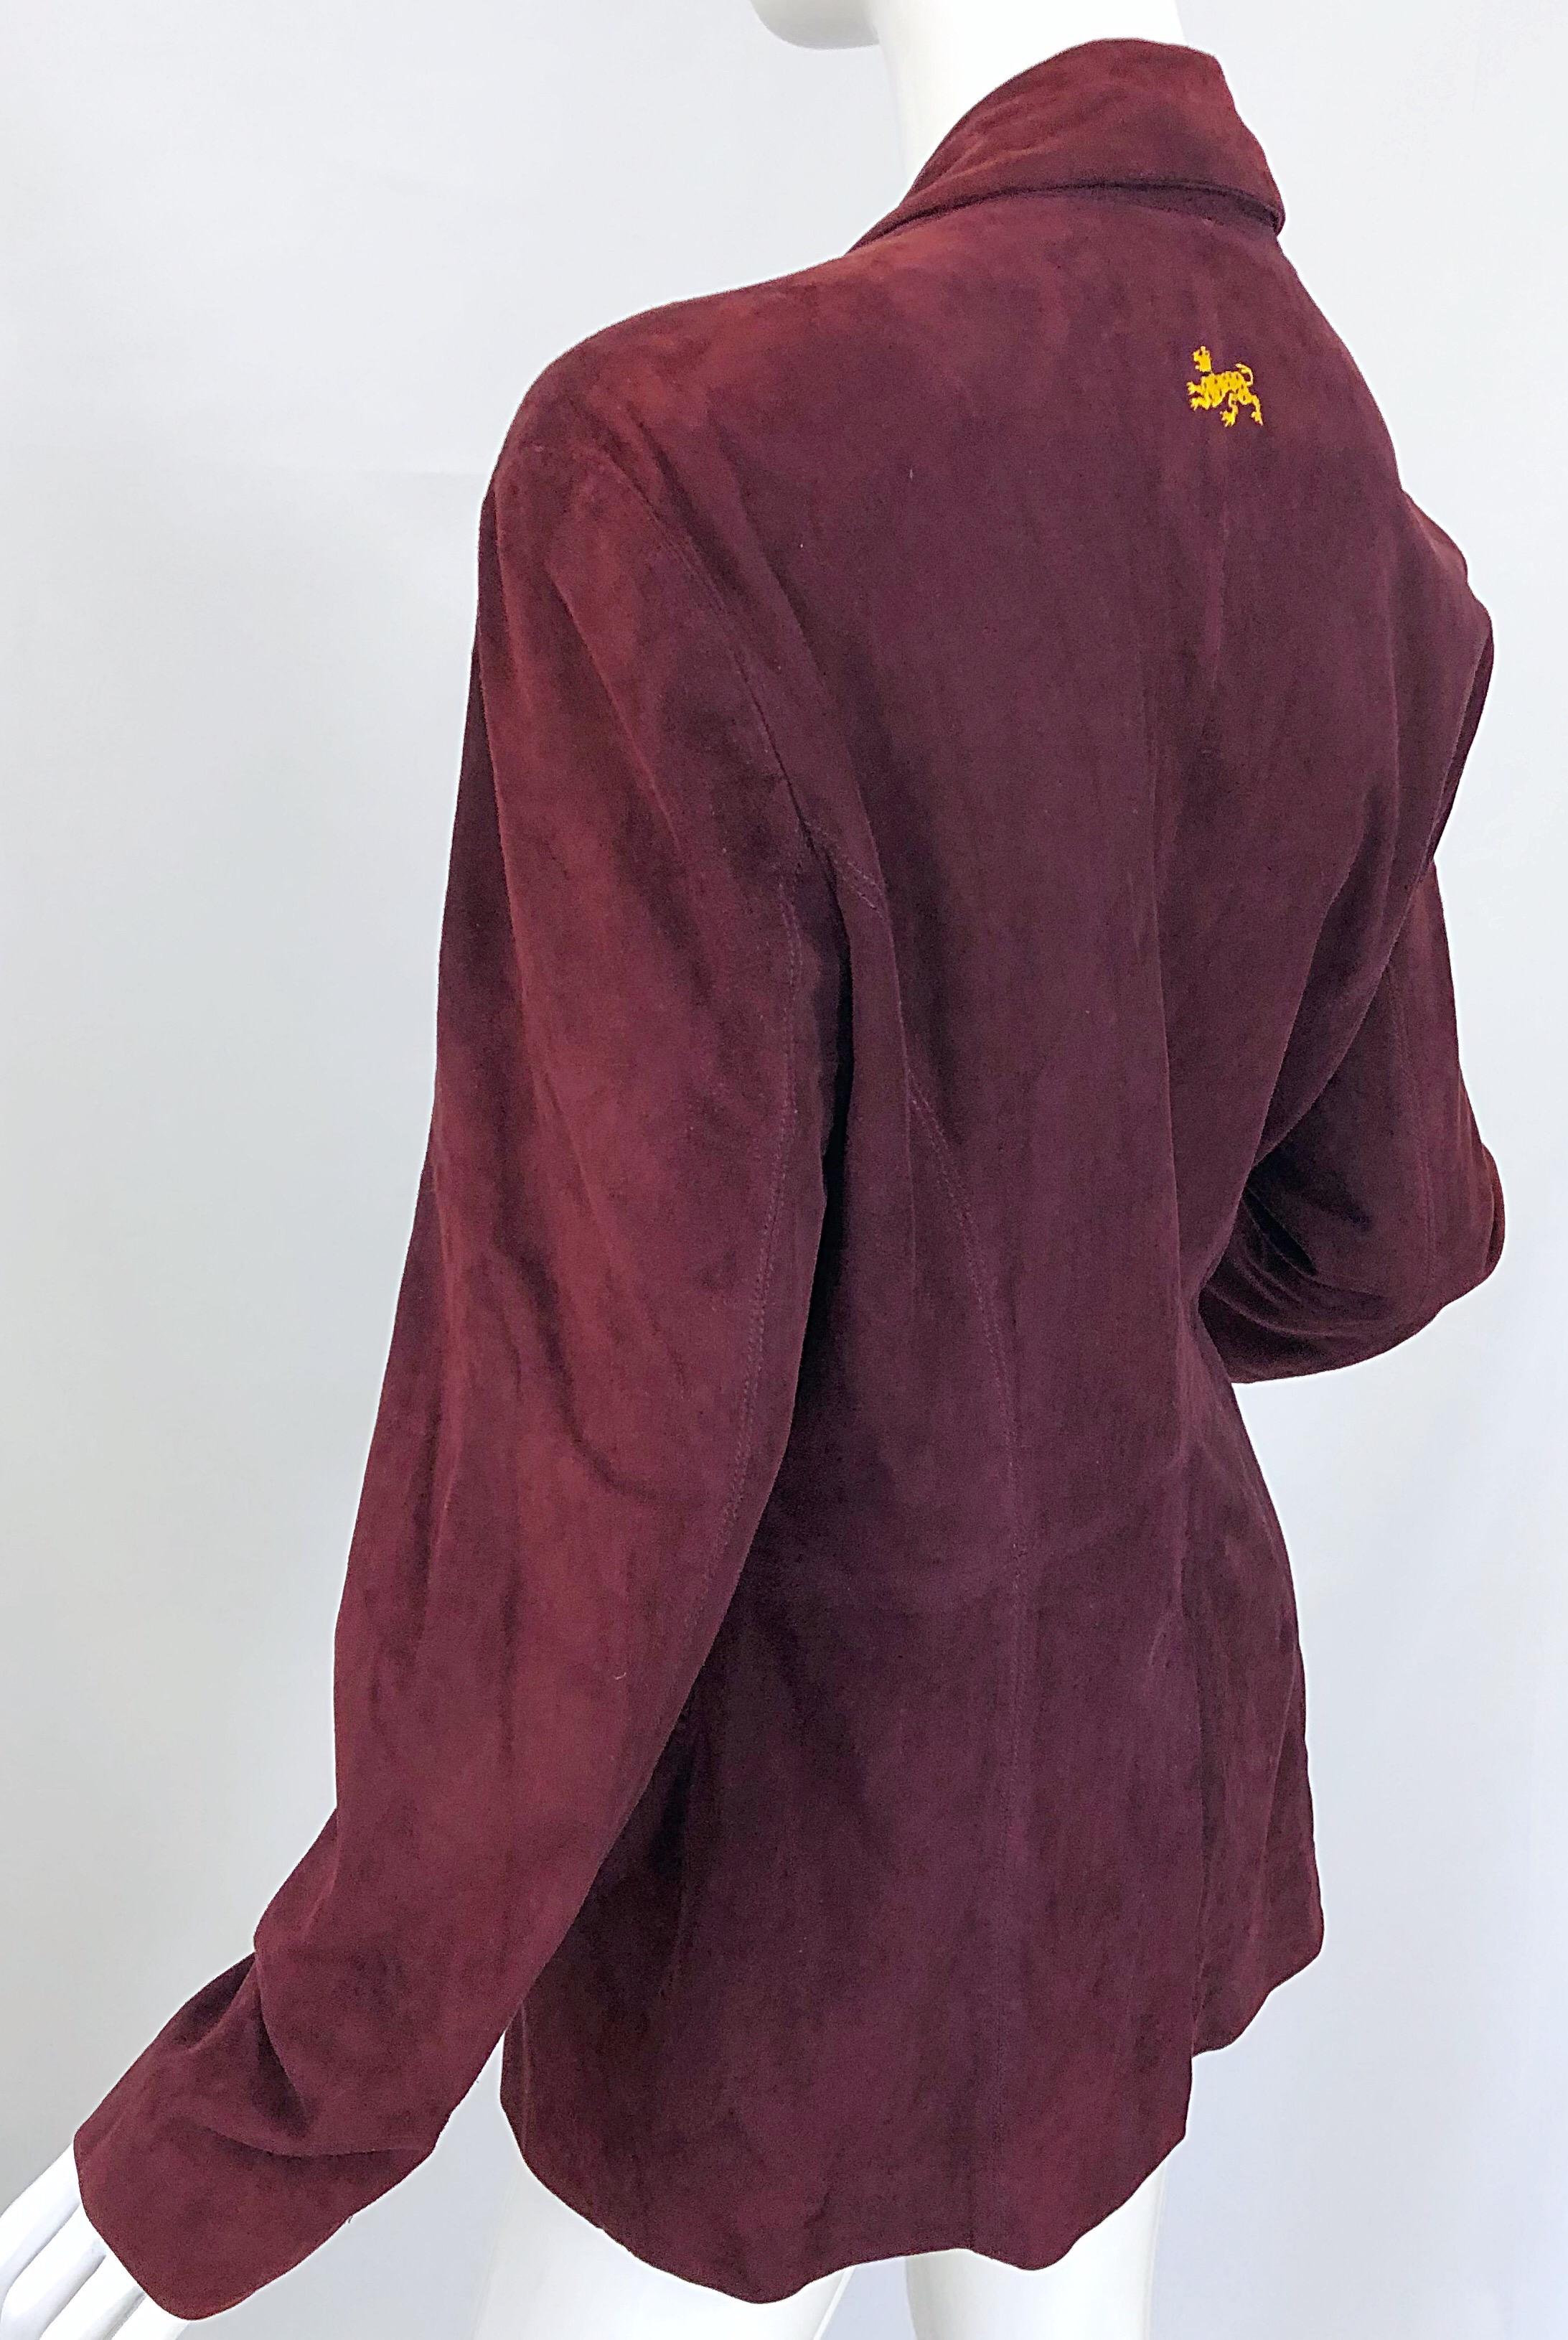 Ozbek 1990s Suede Leather Size 8 Burgundy Maroon Double Breasted Blazer Jacket For Sale 6